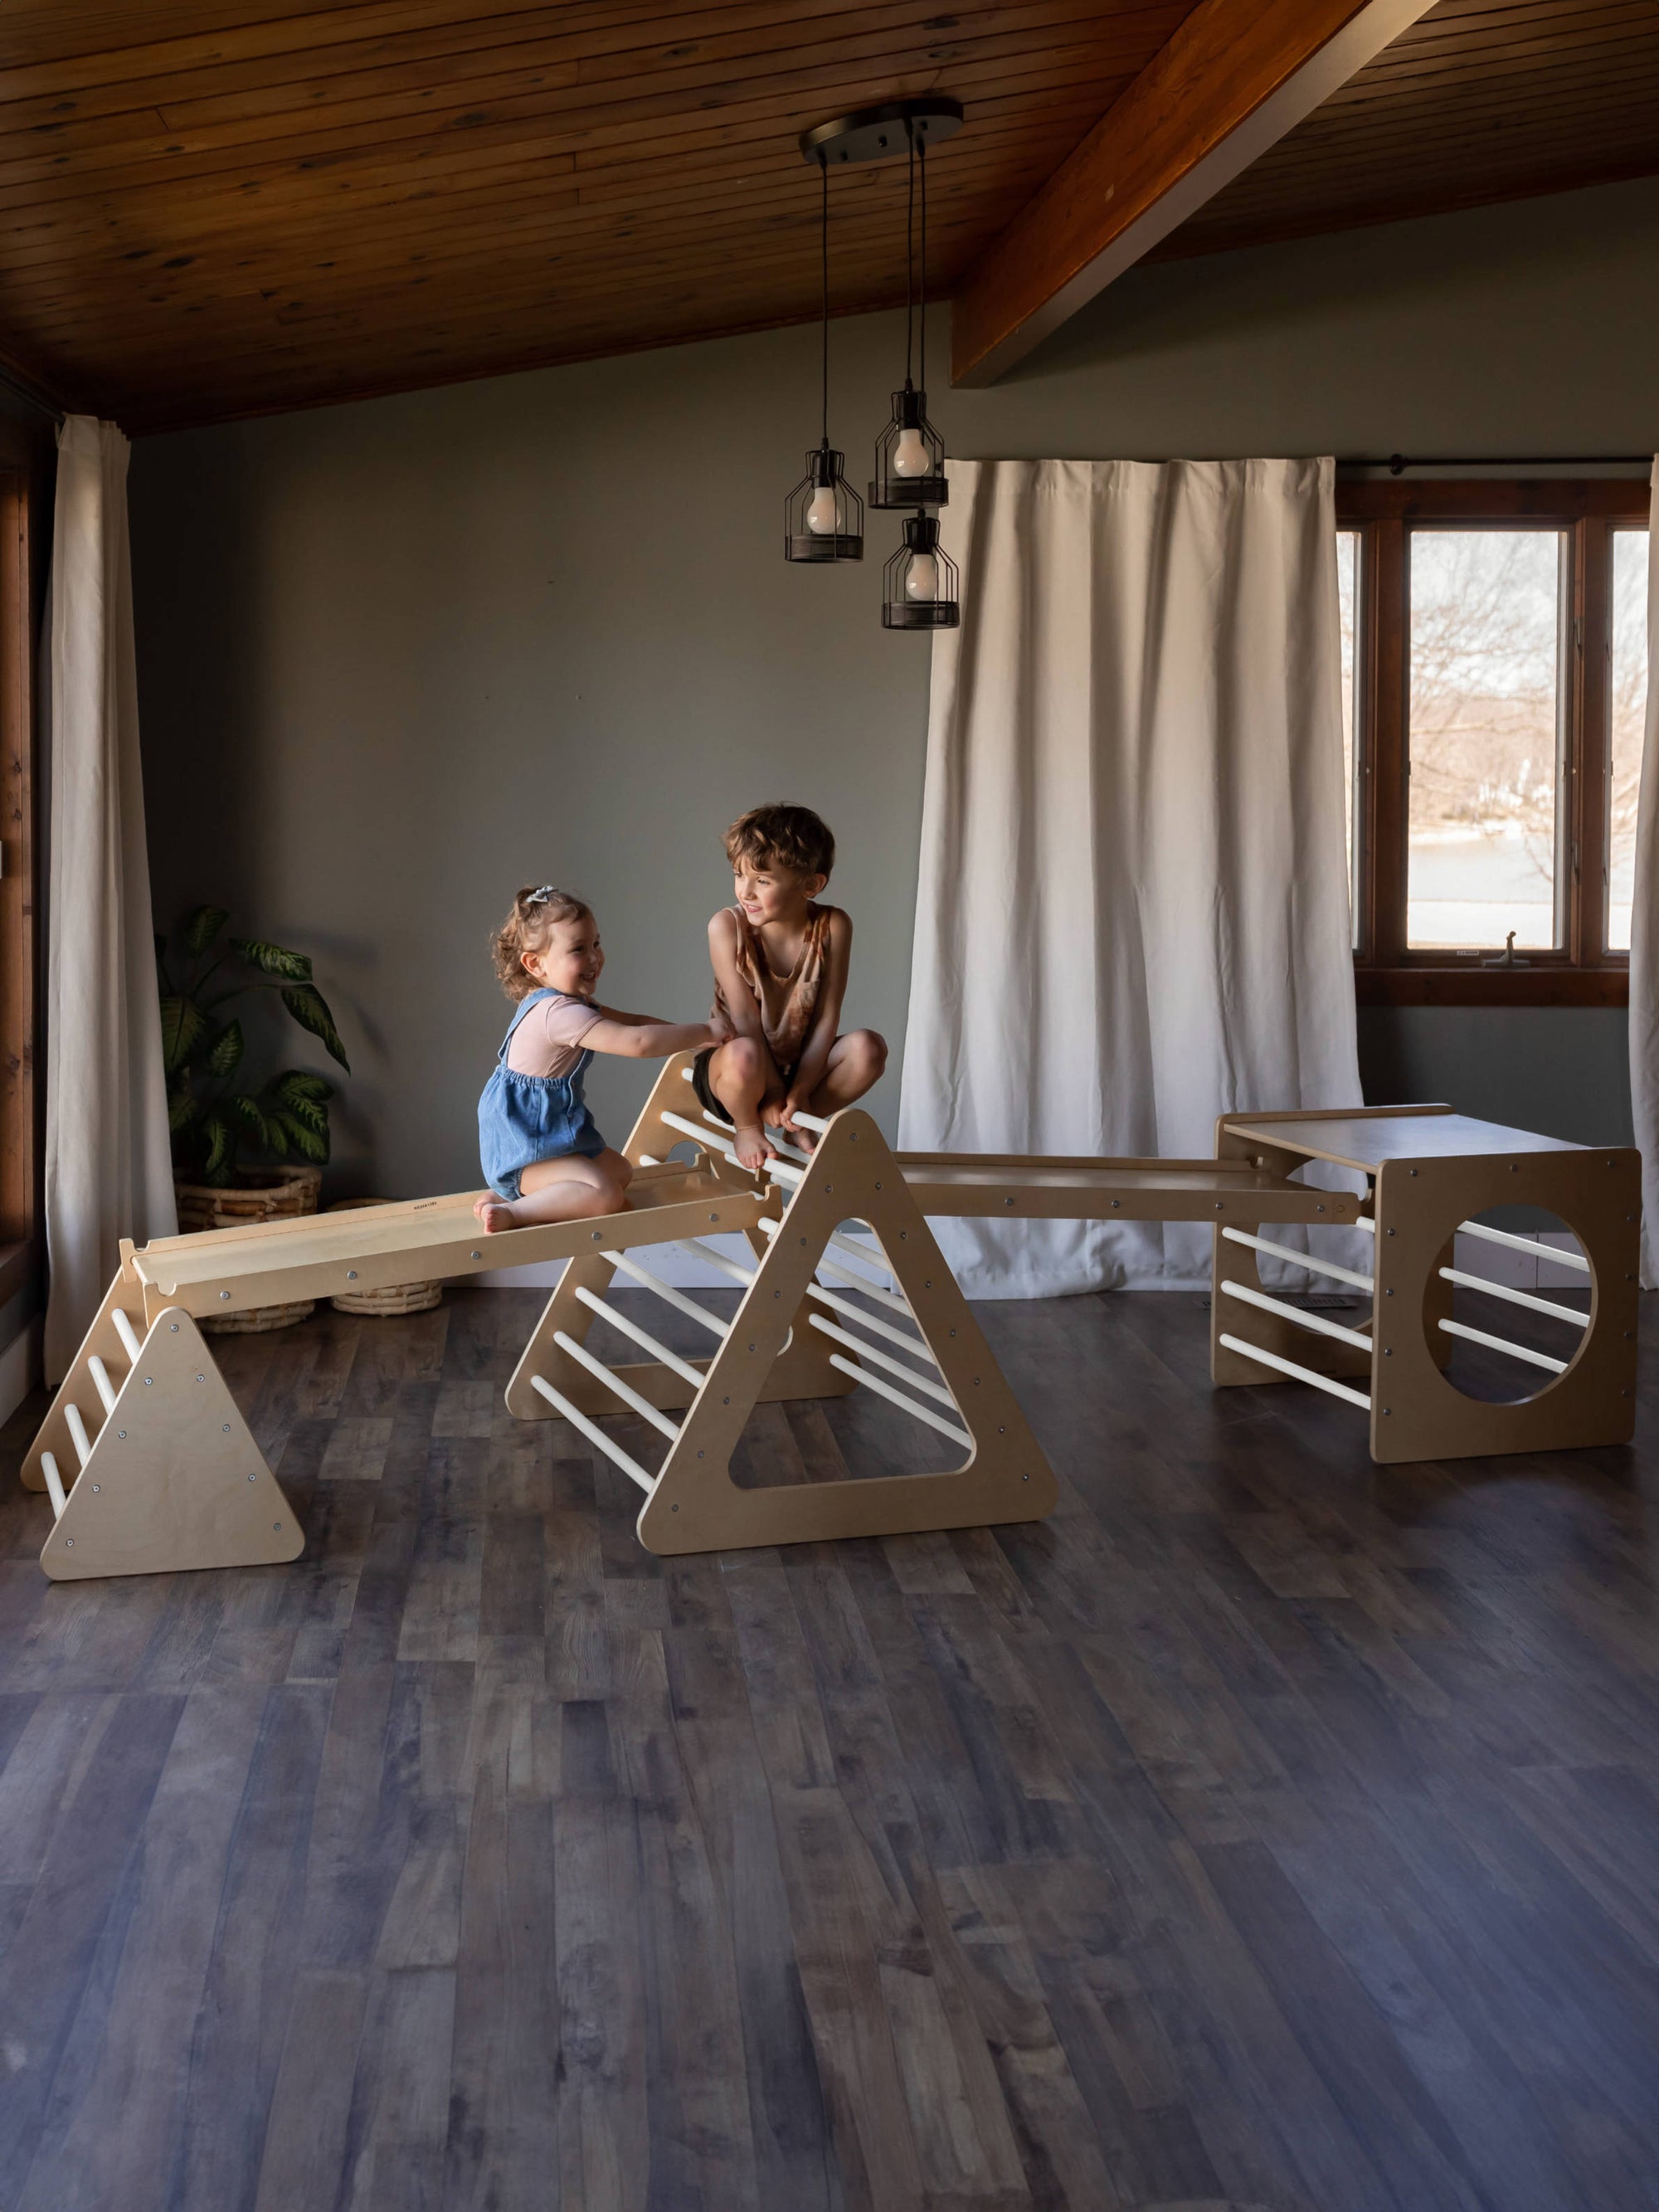 Andes Climbing Playset